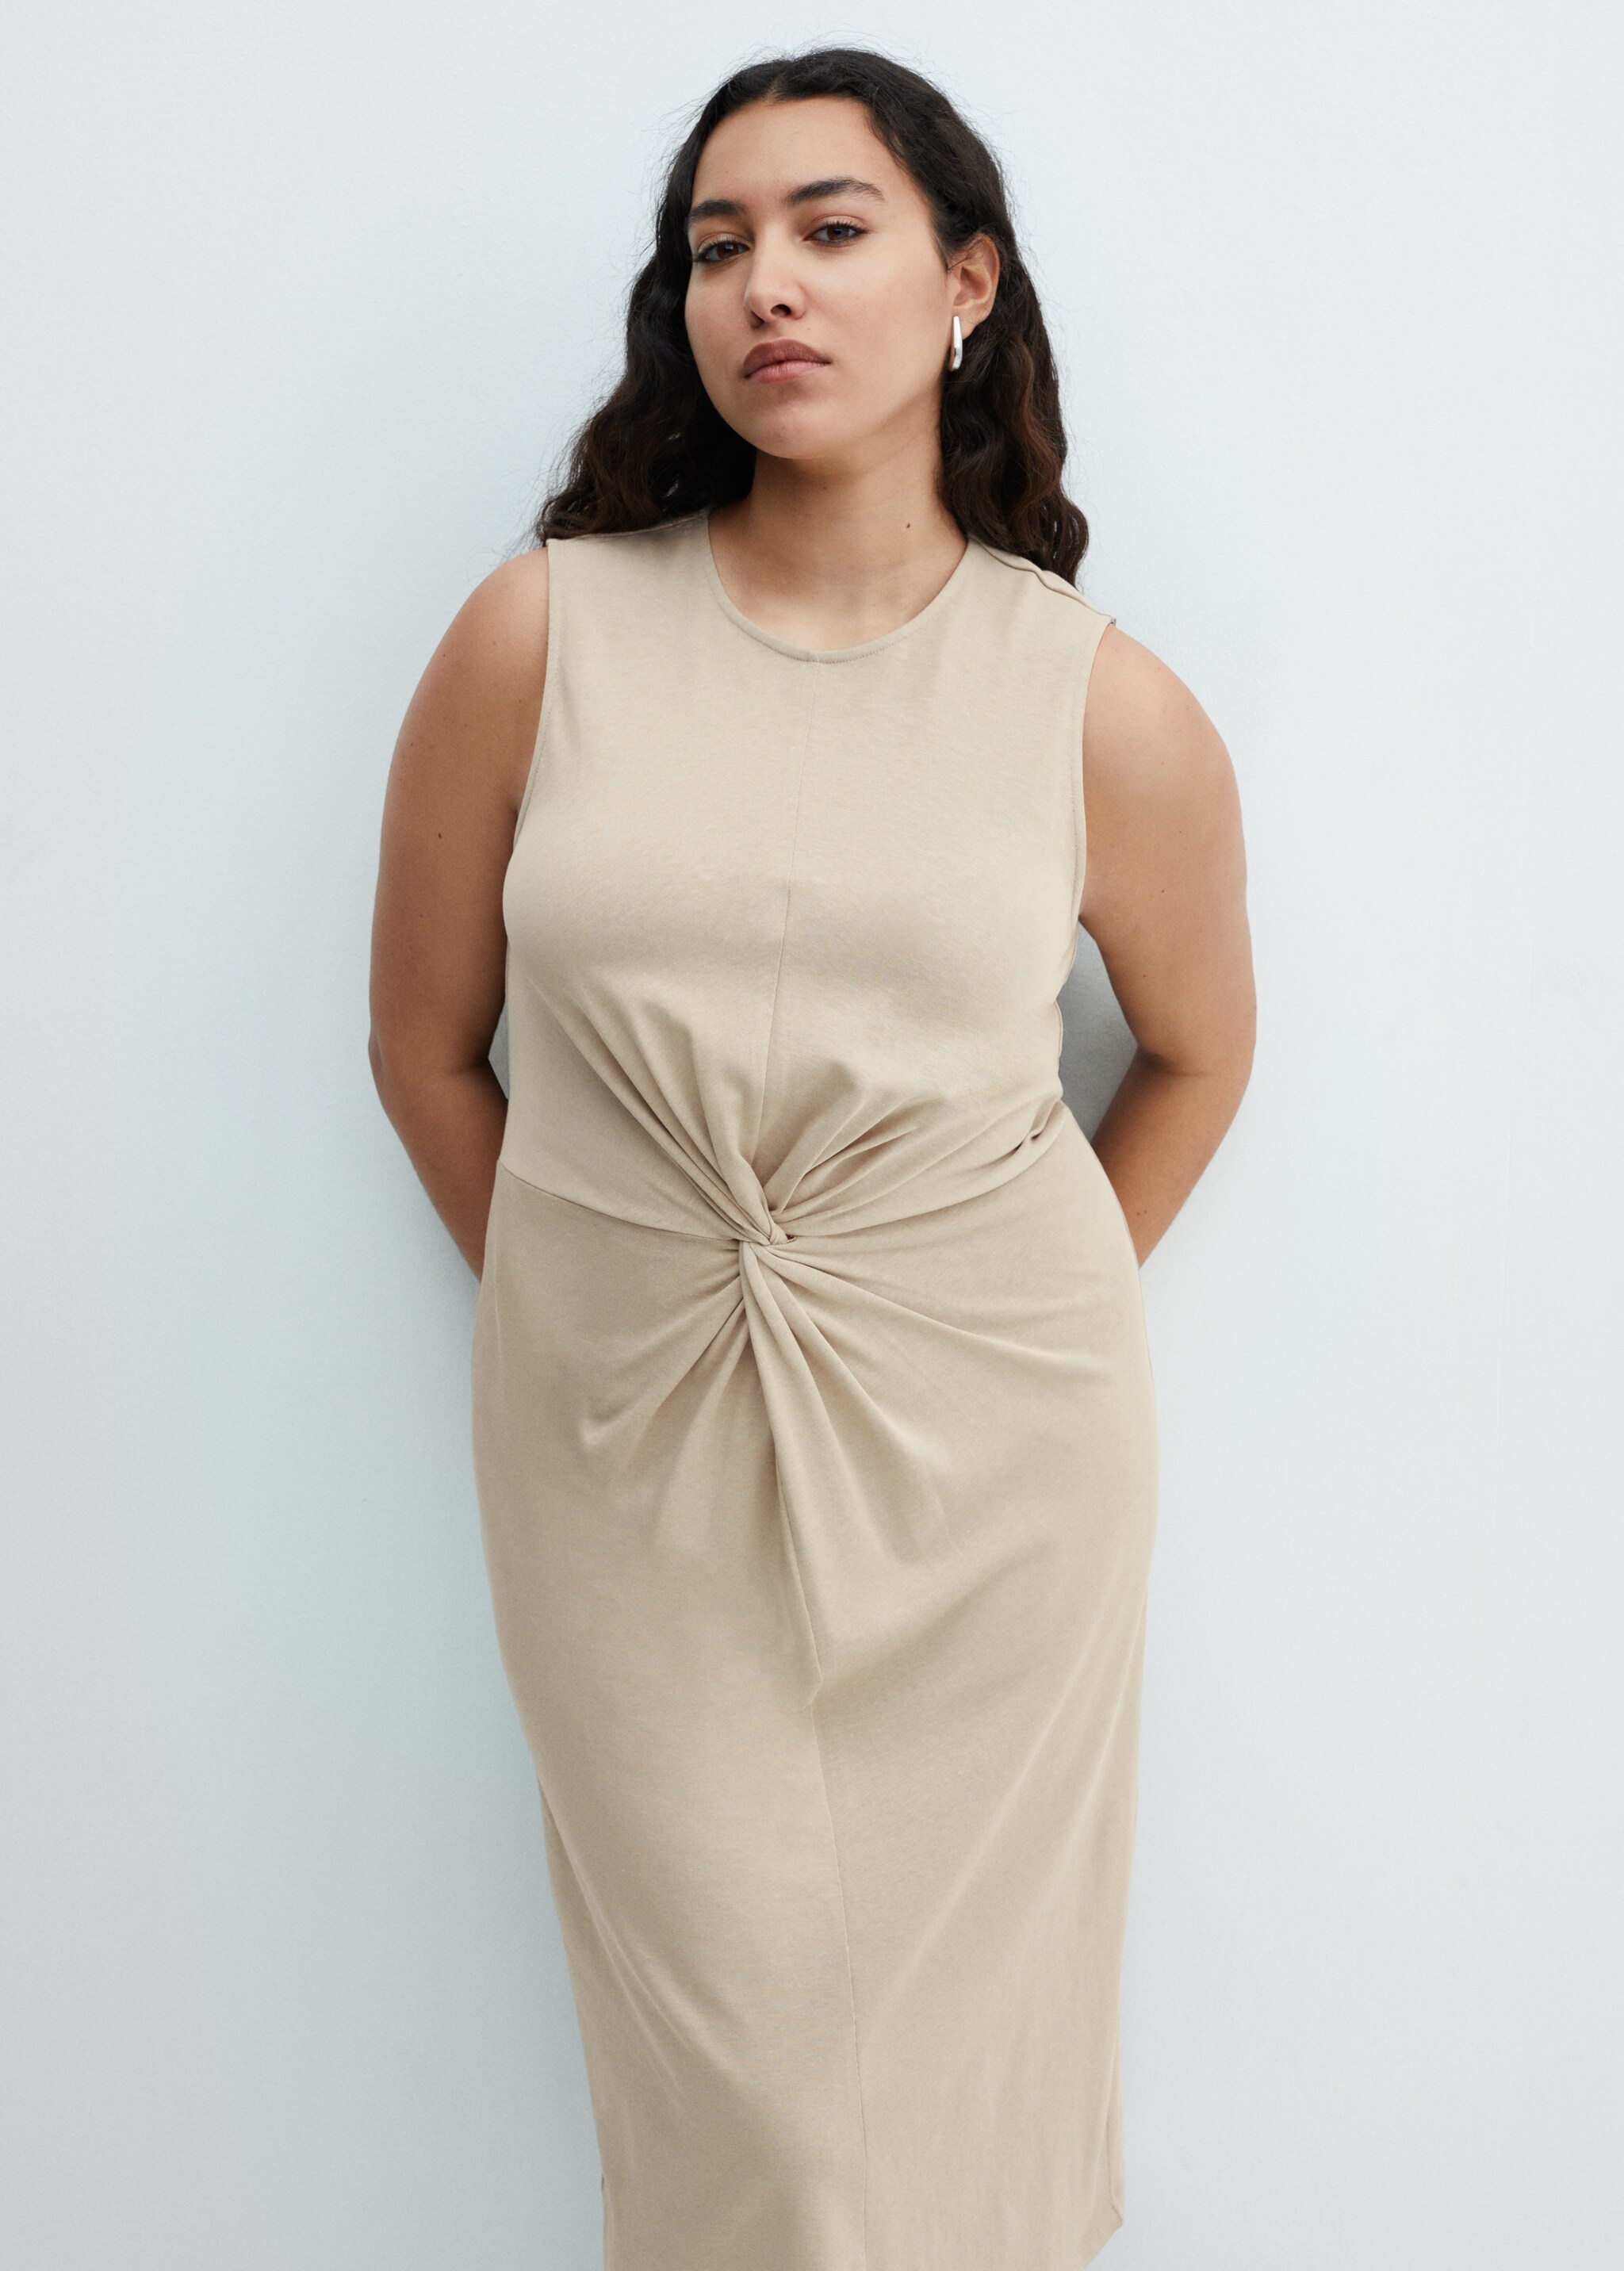 Knotted cotton dress - Details of the article 5